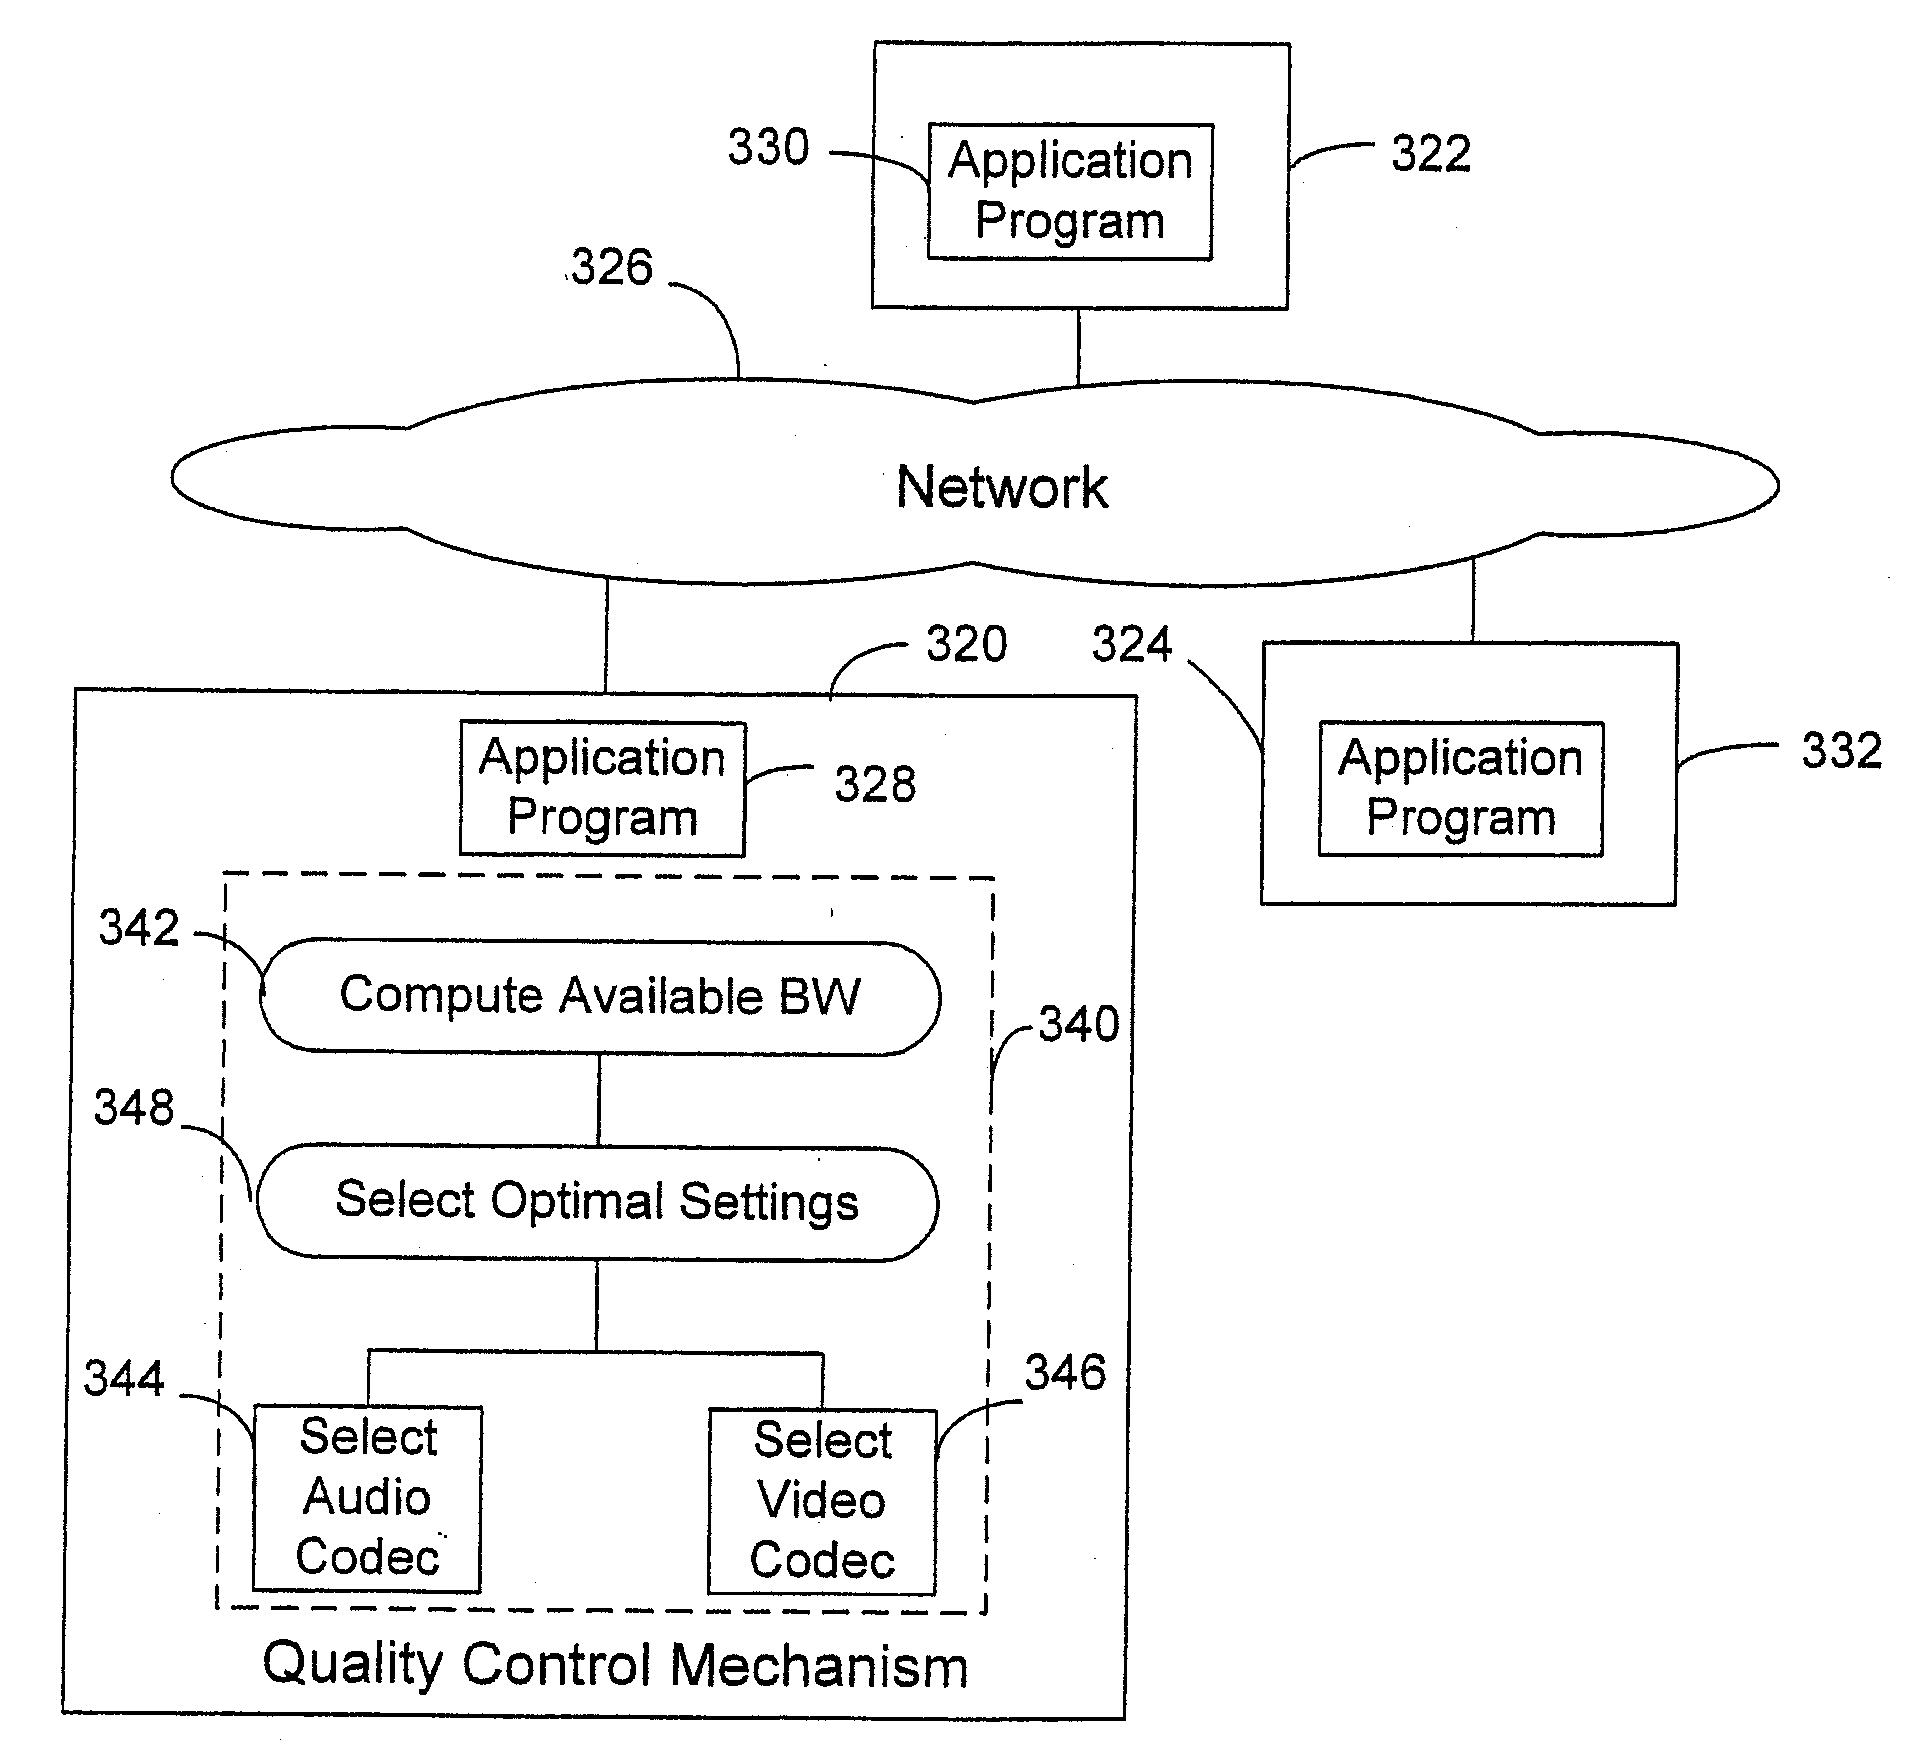 Method and system for providing adaptive bandwith control for real-time communication